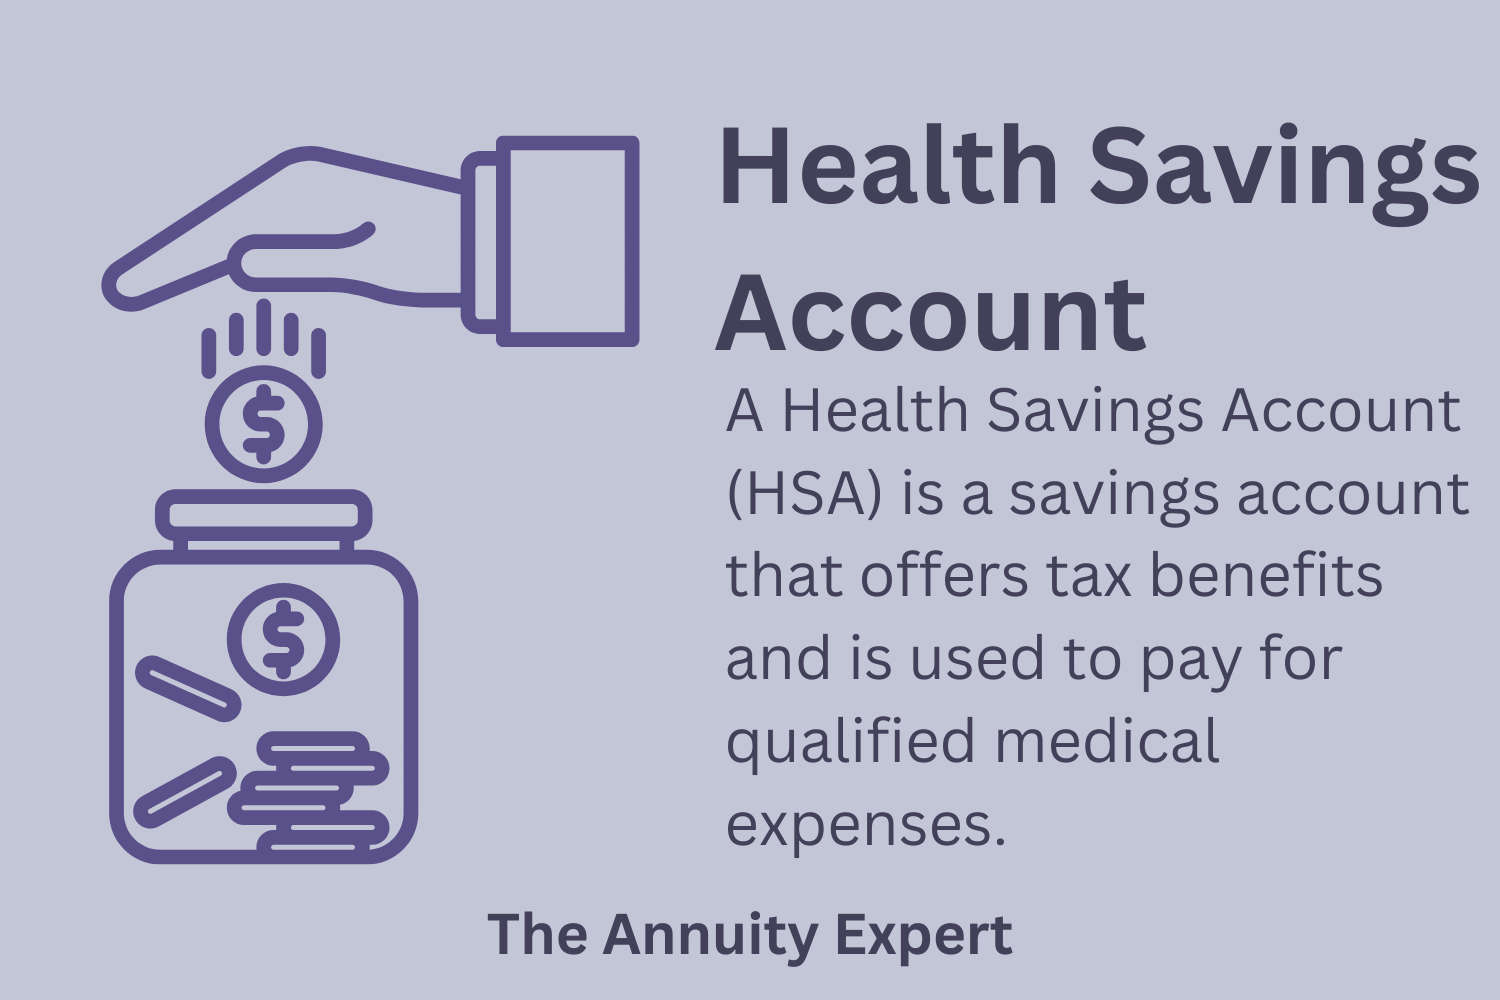 What Are Health Savings Account